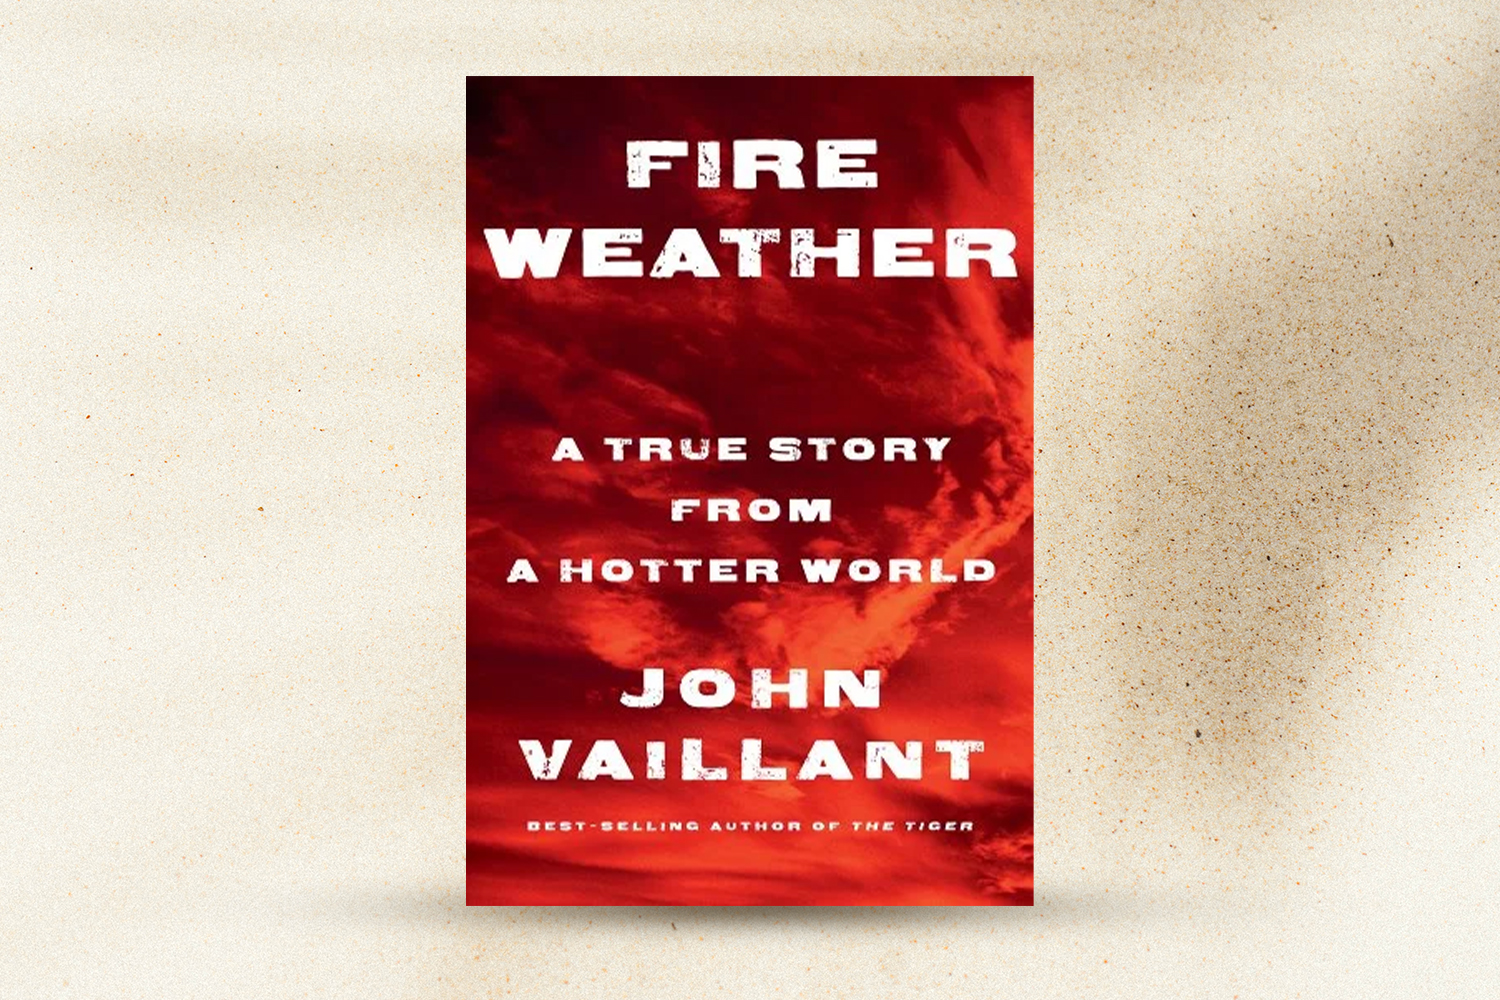 "Fire Weather" book cover